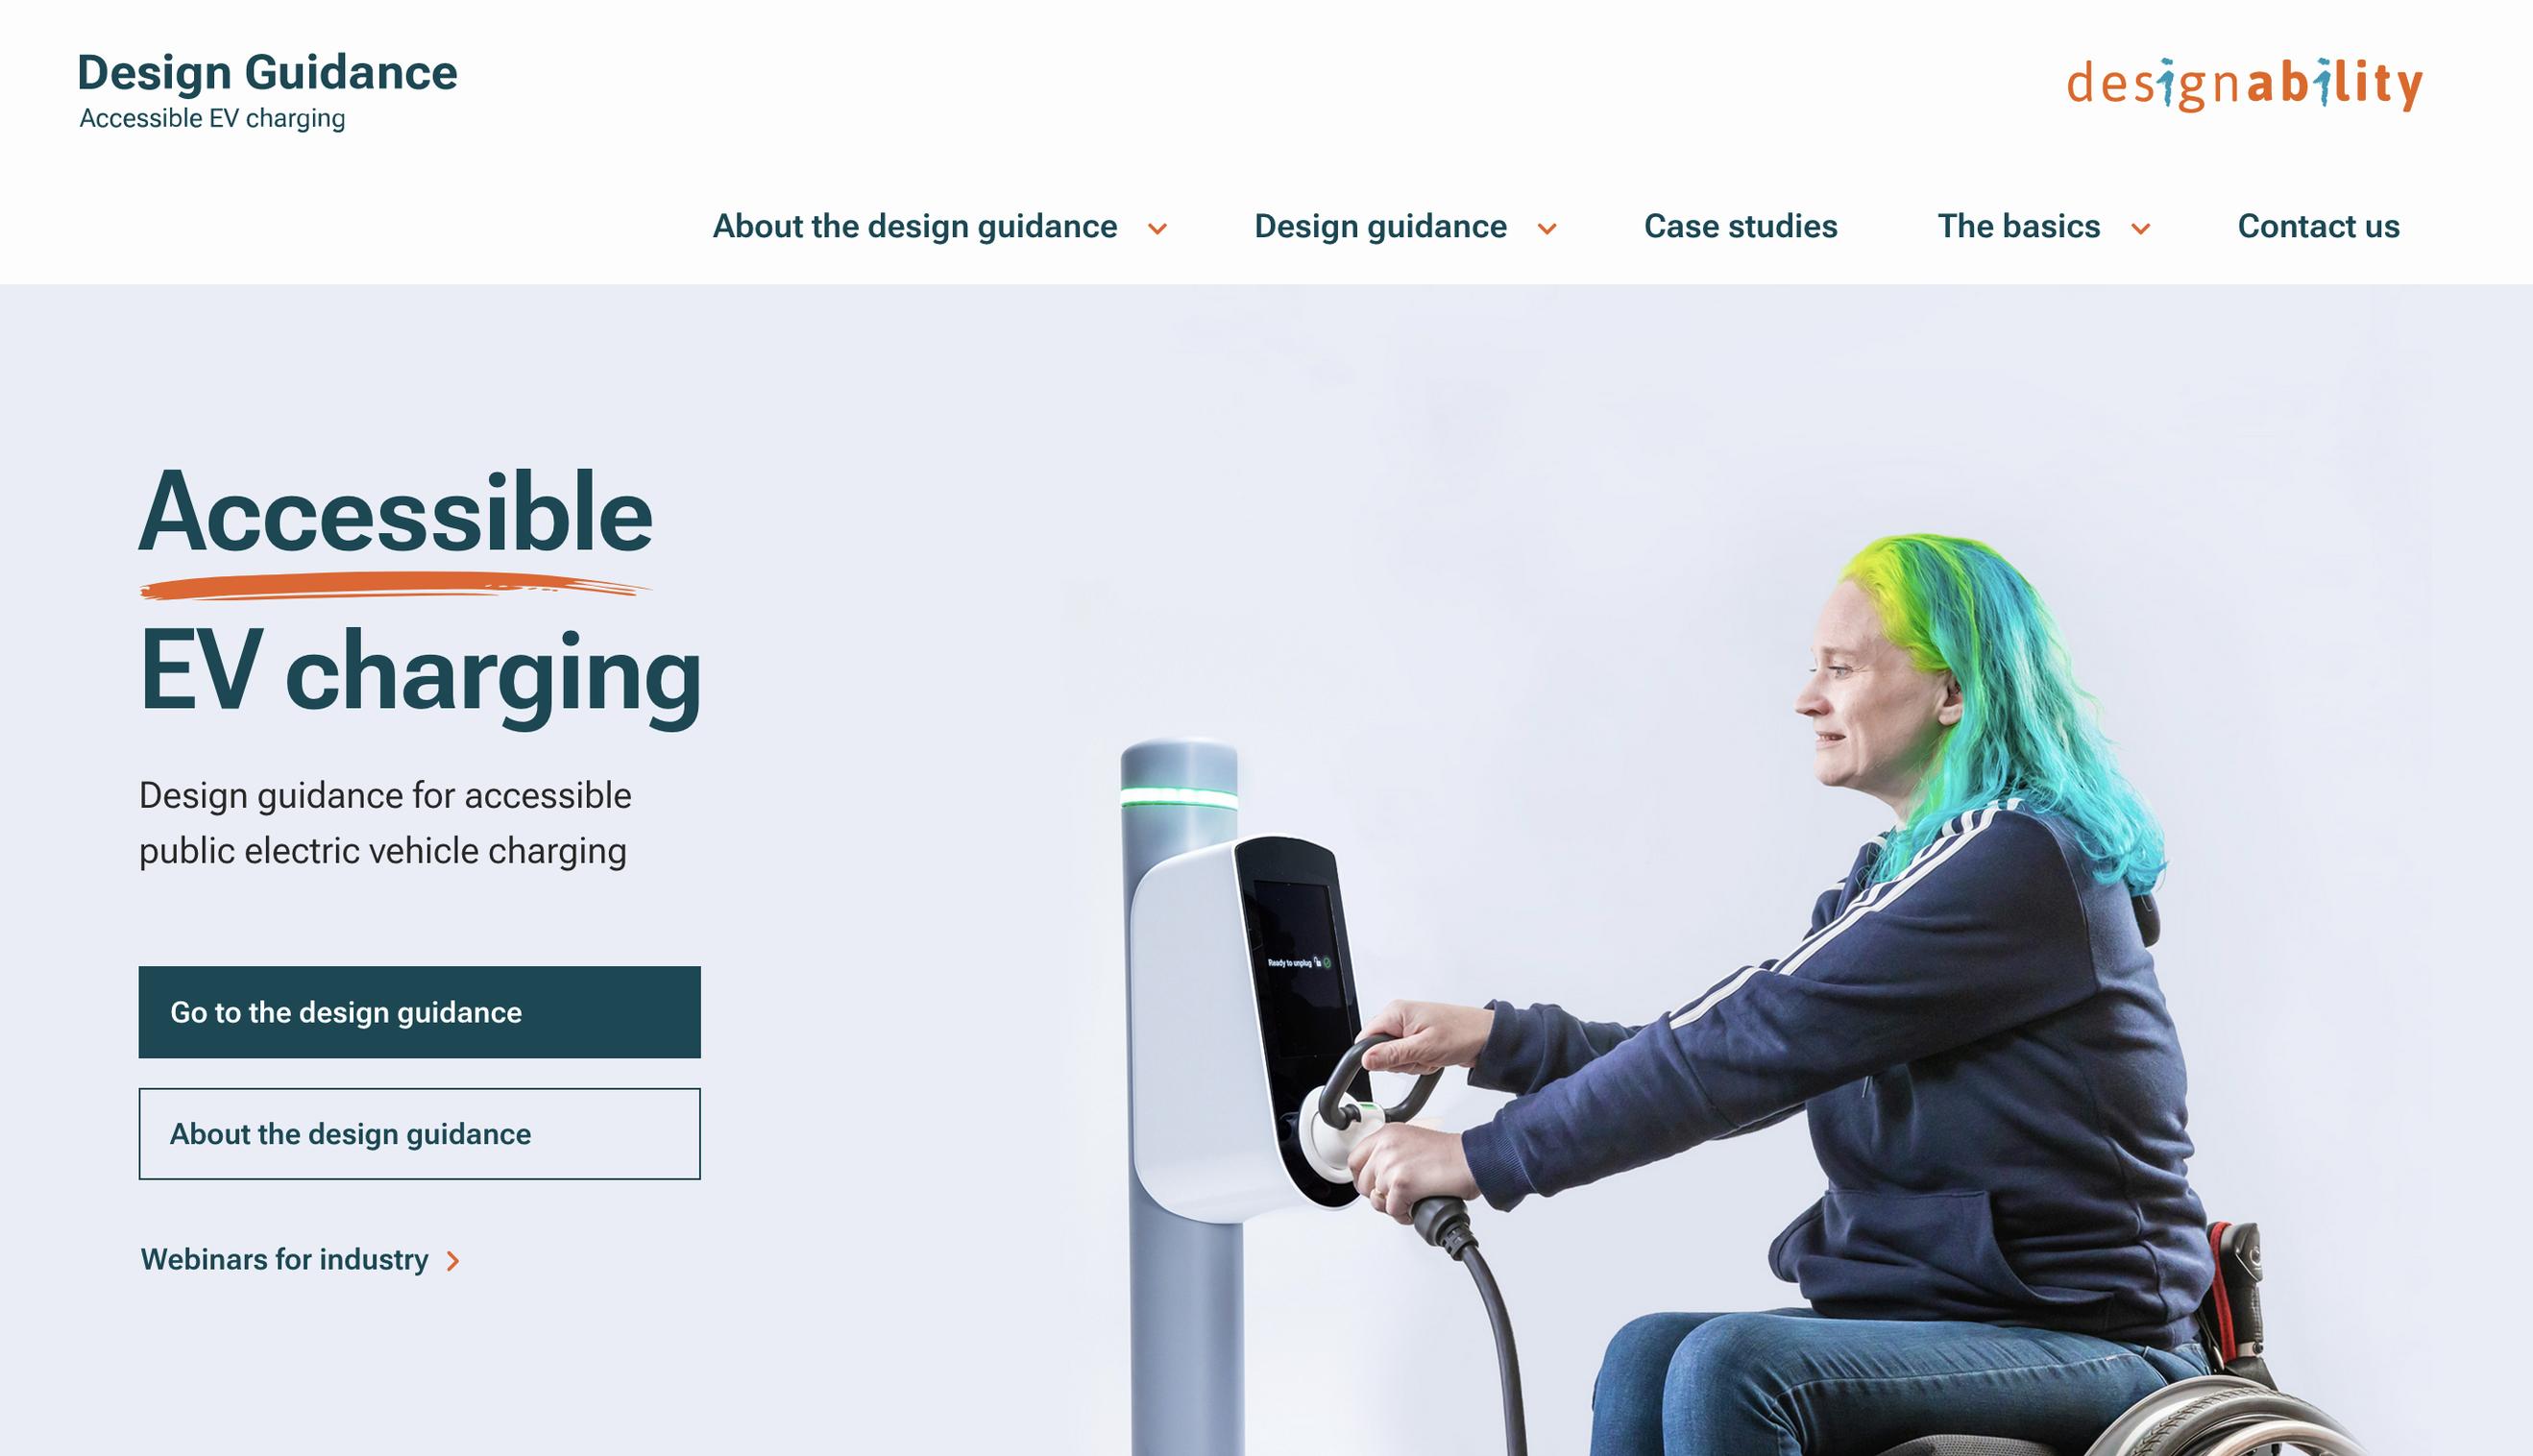 Designability publishes accessibility guidance for EV charging systems